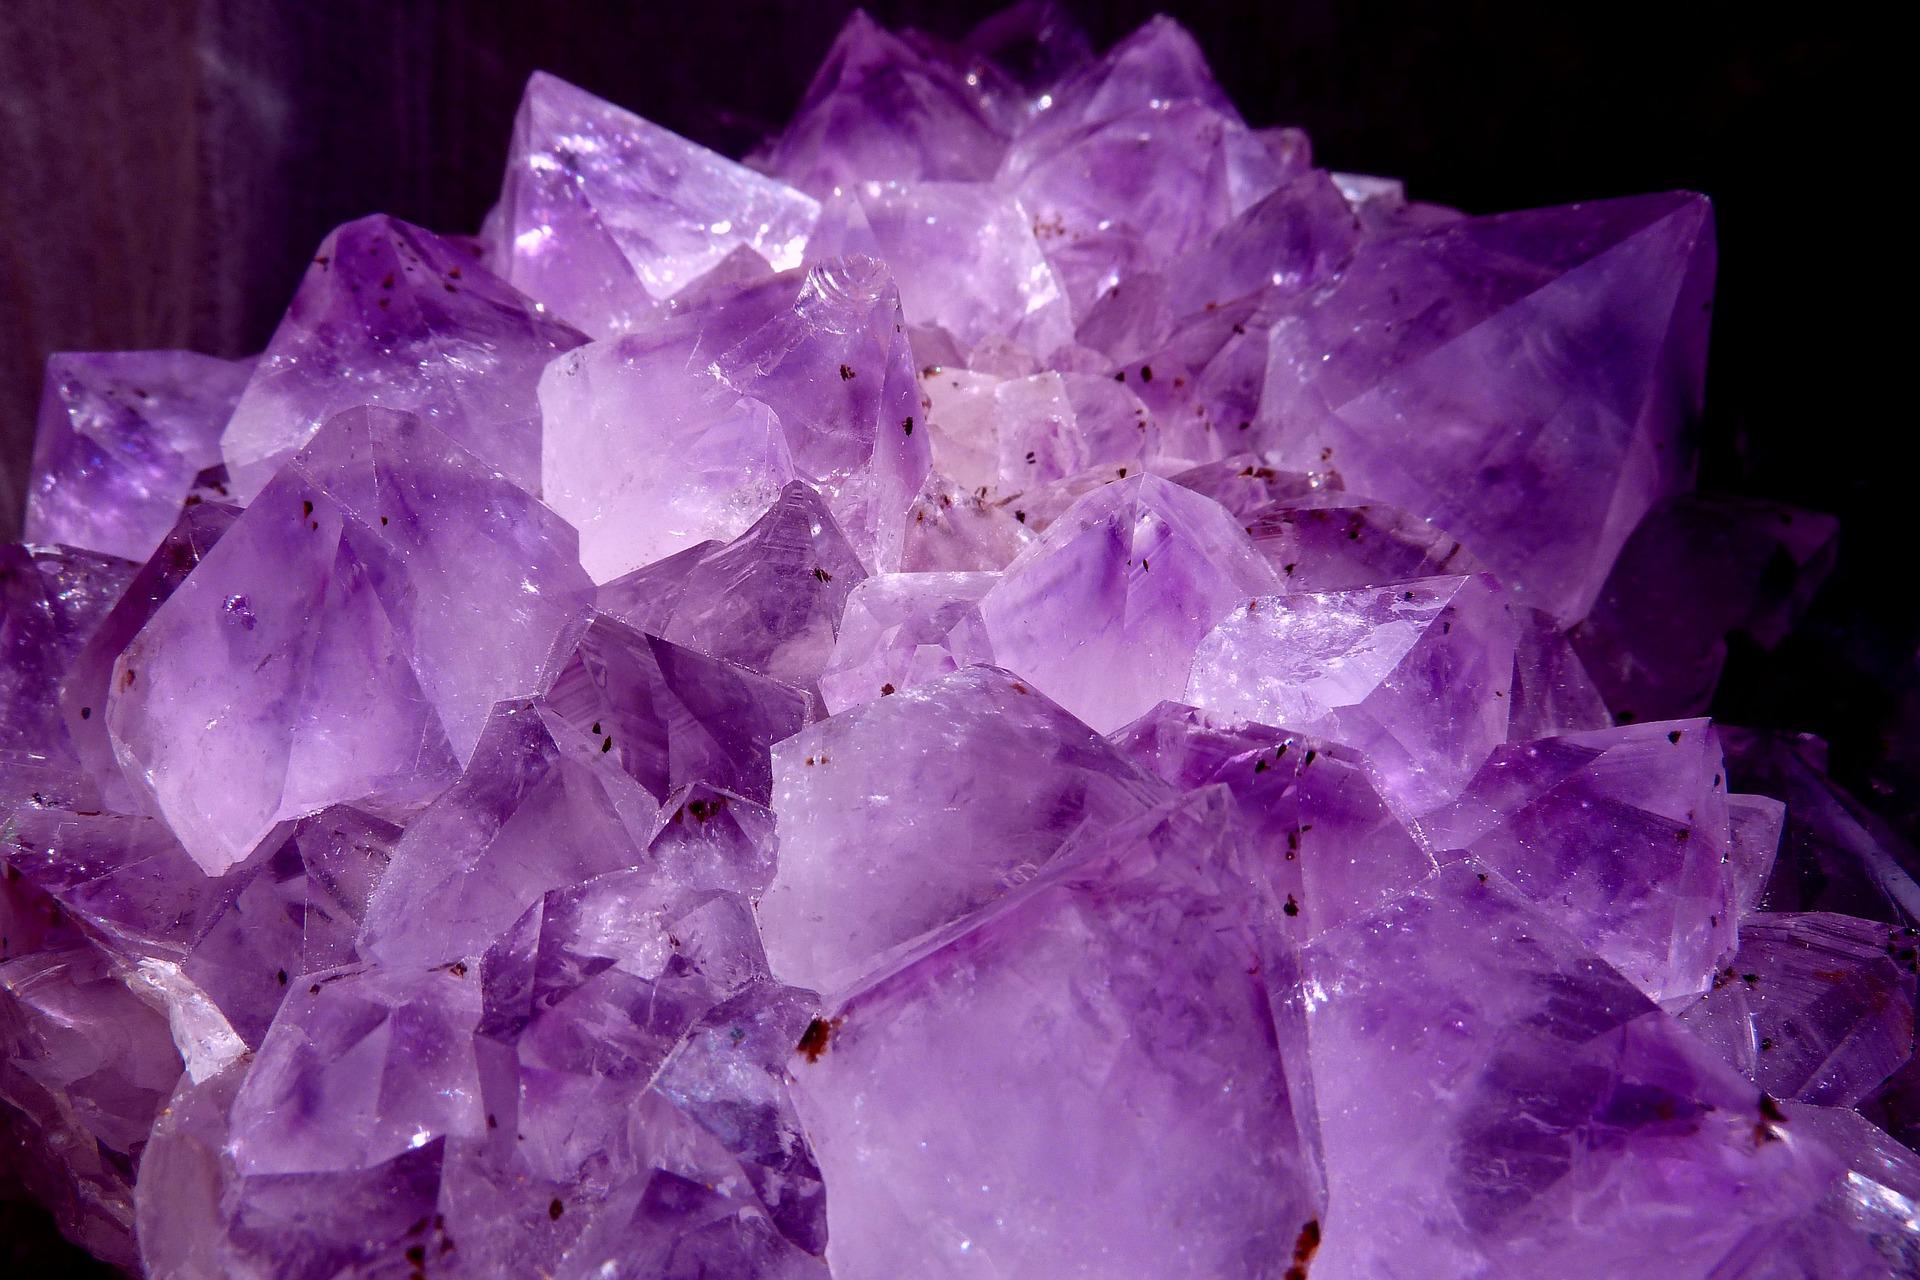 Love Crystals? Checkout The Crystal Guide in SE Portland